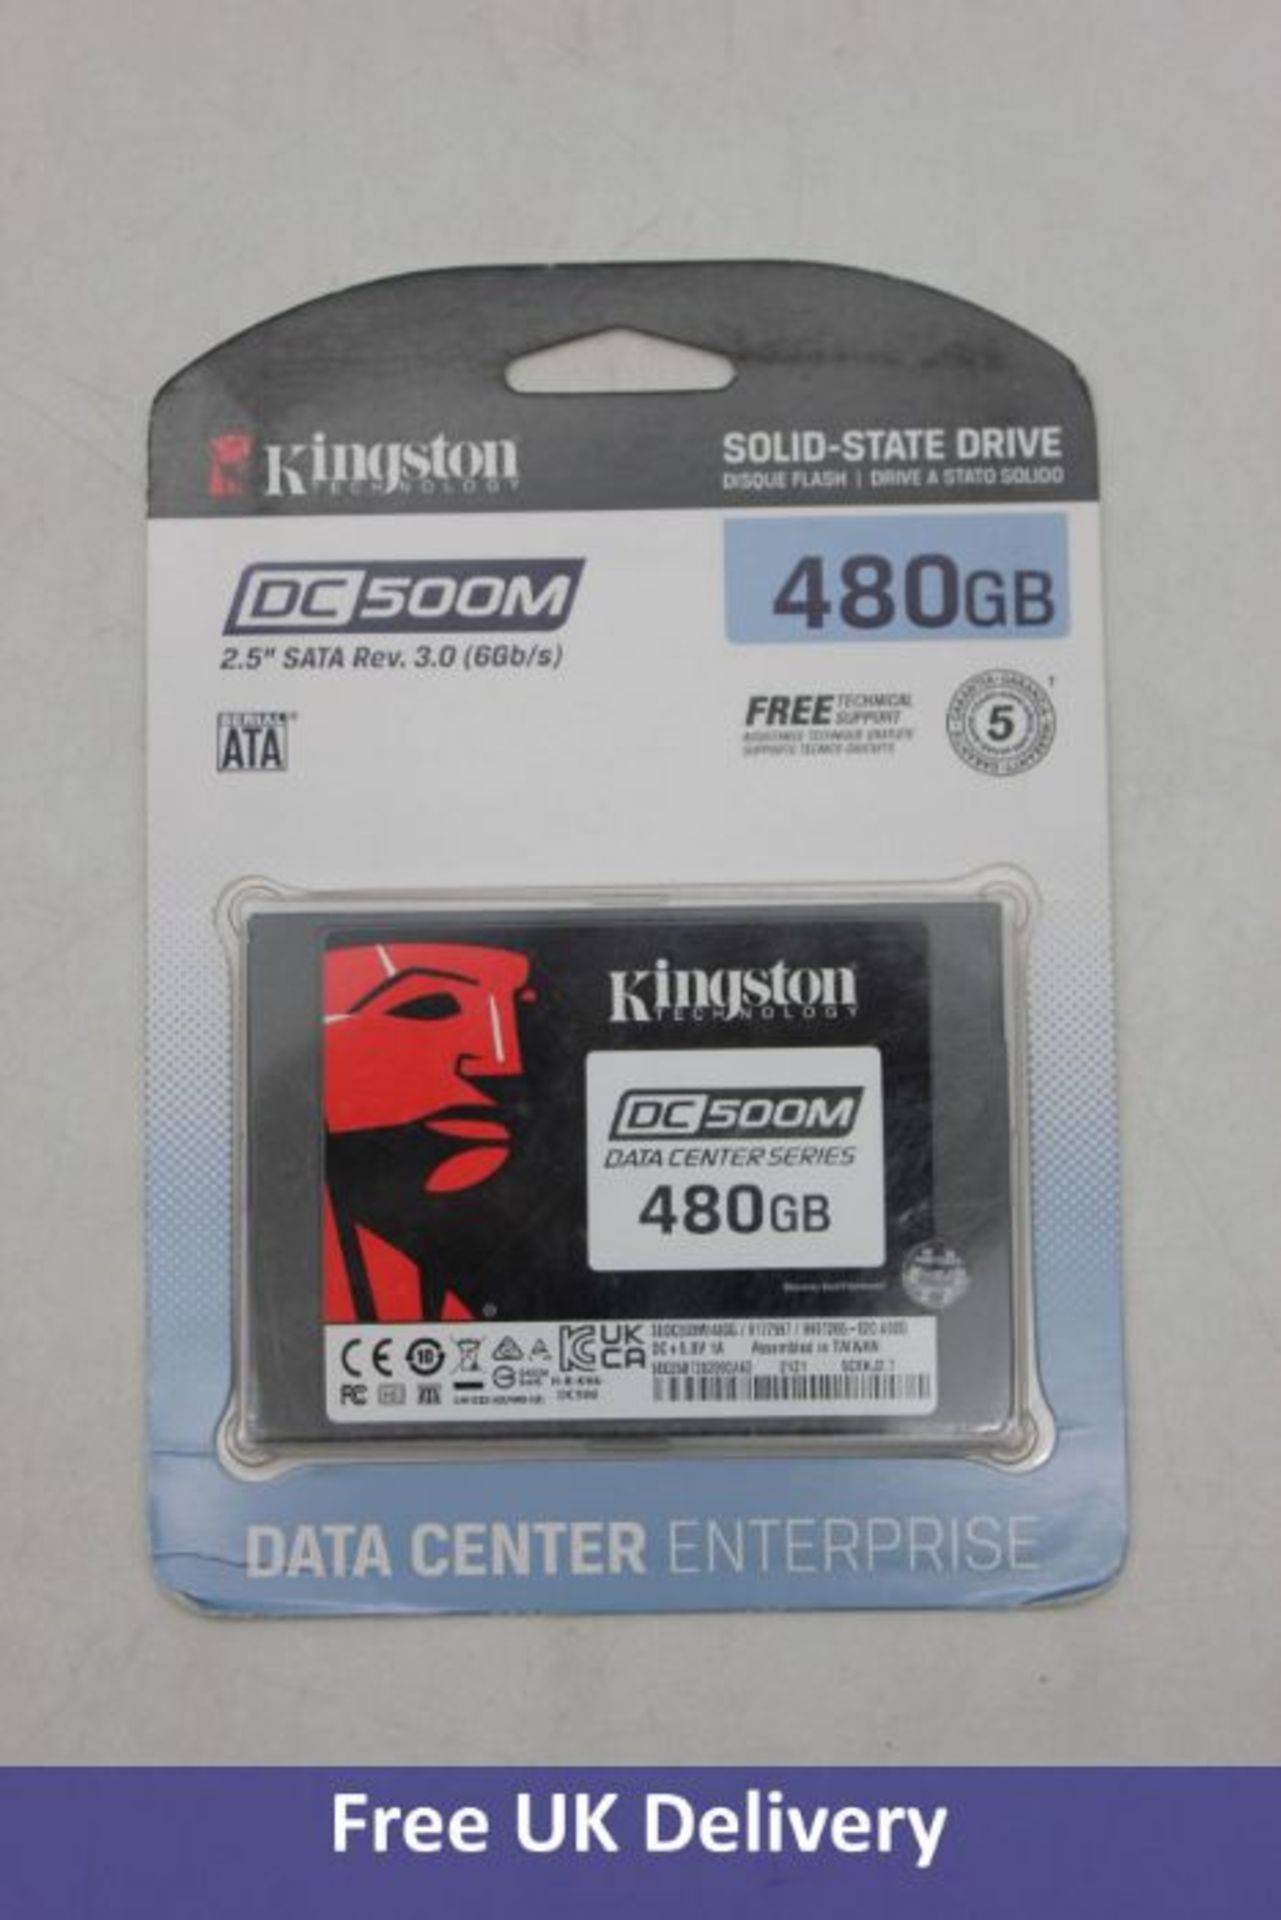 Two Kingston Solid-State Drives, 480GB